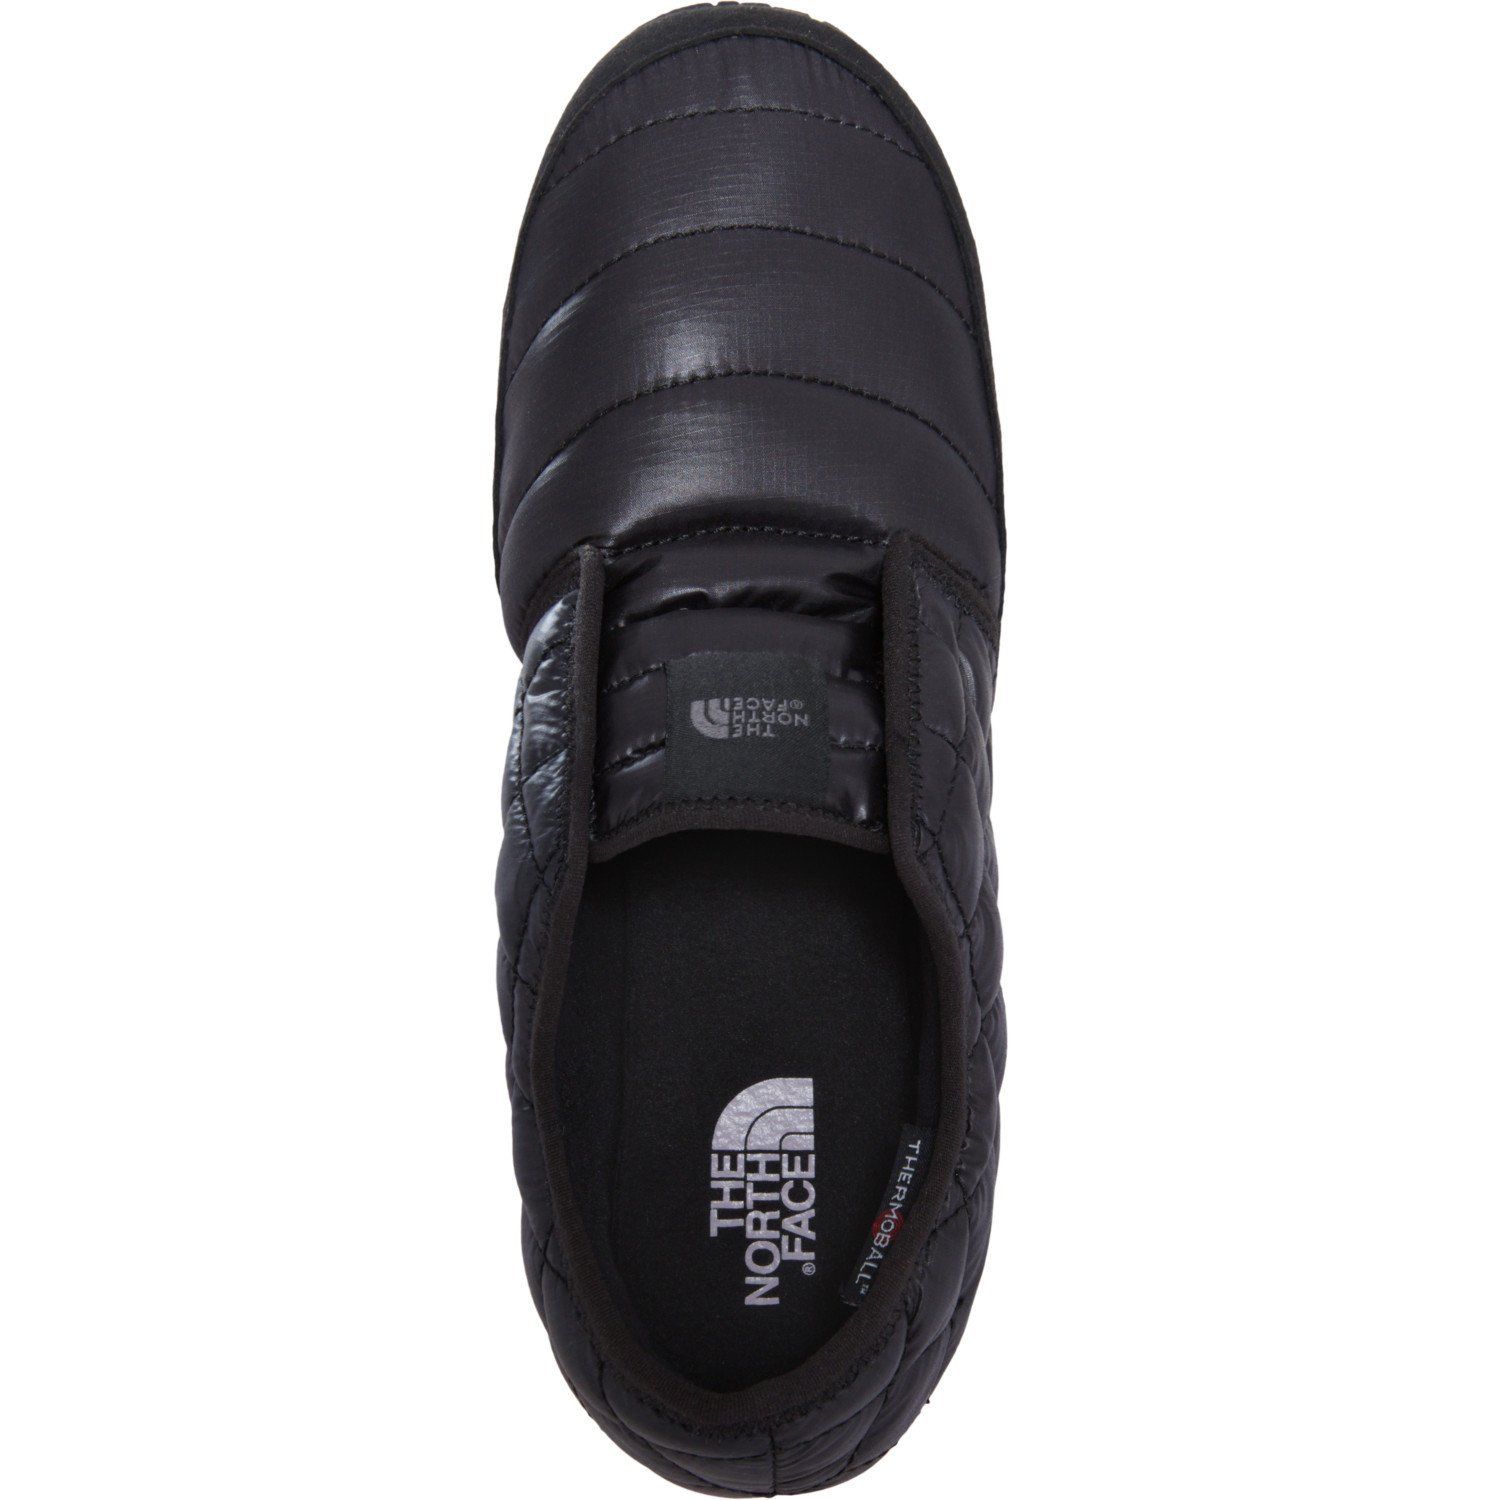 The North Face Thermoball Traction Mule II Slipper - דגם נשים, מידה 37